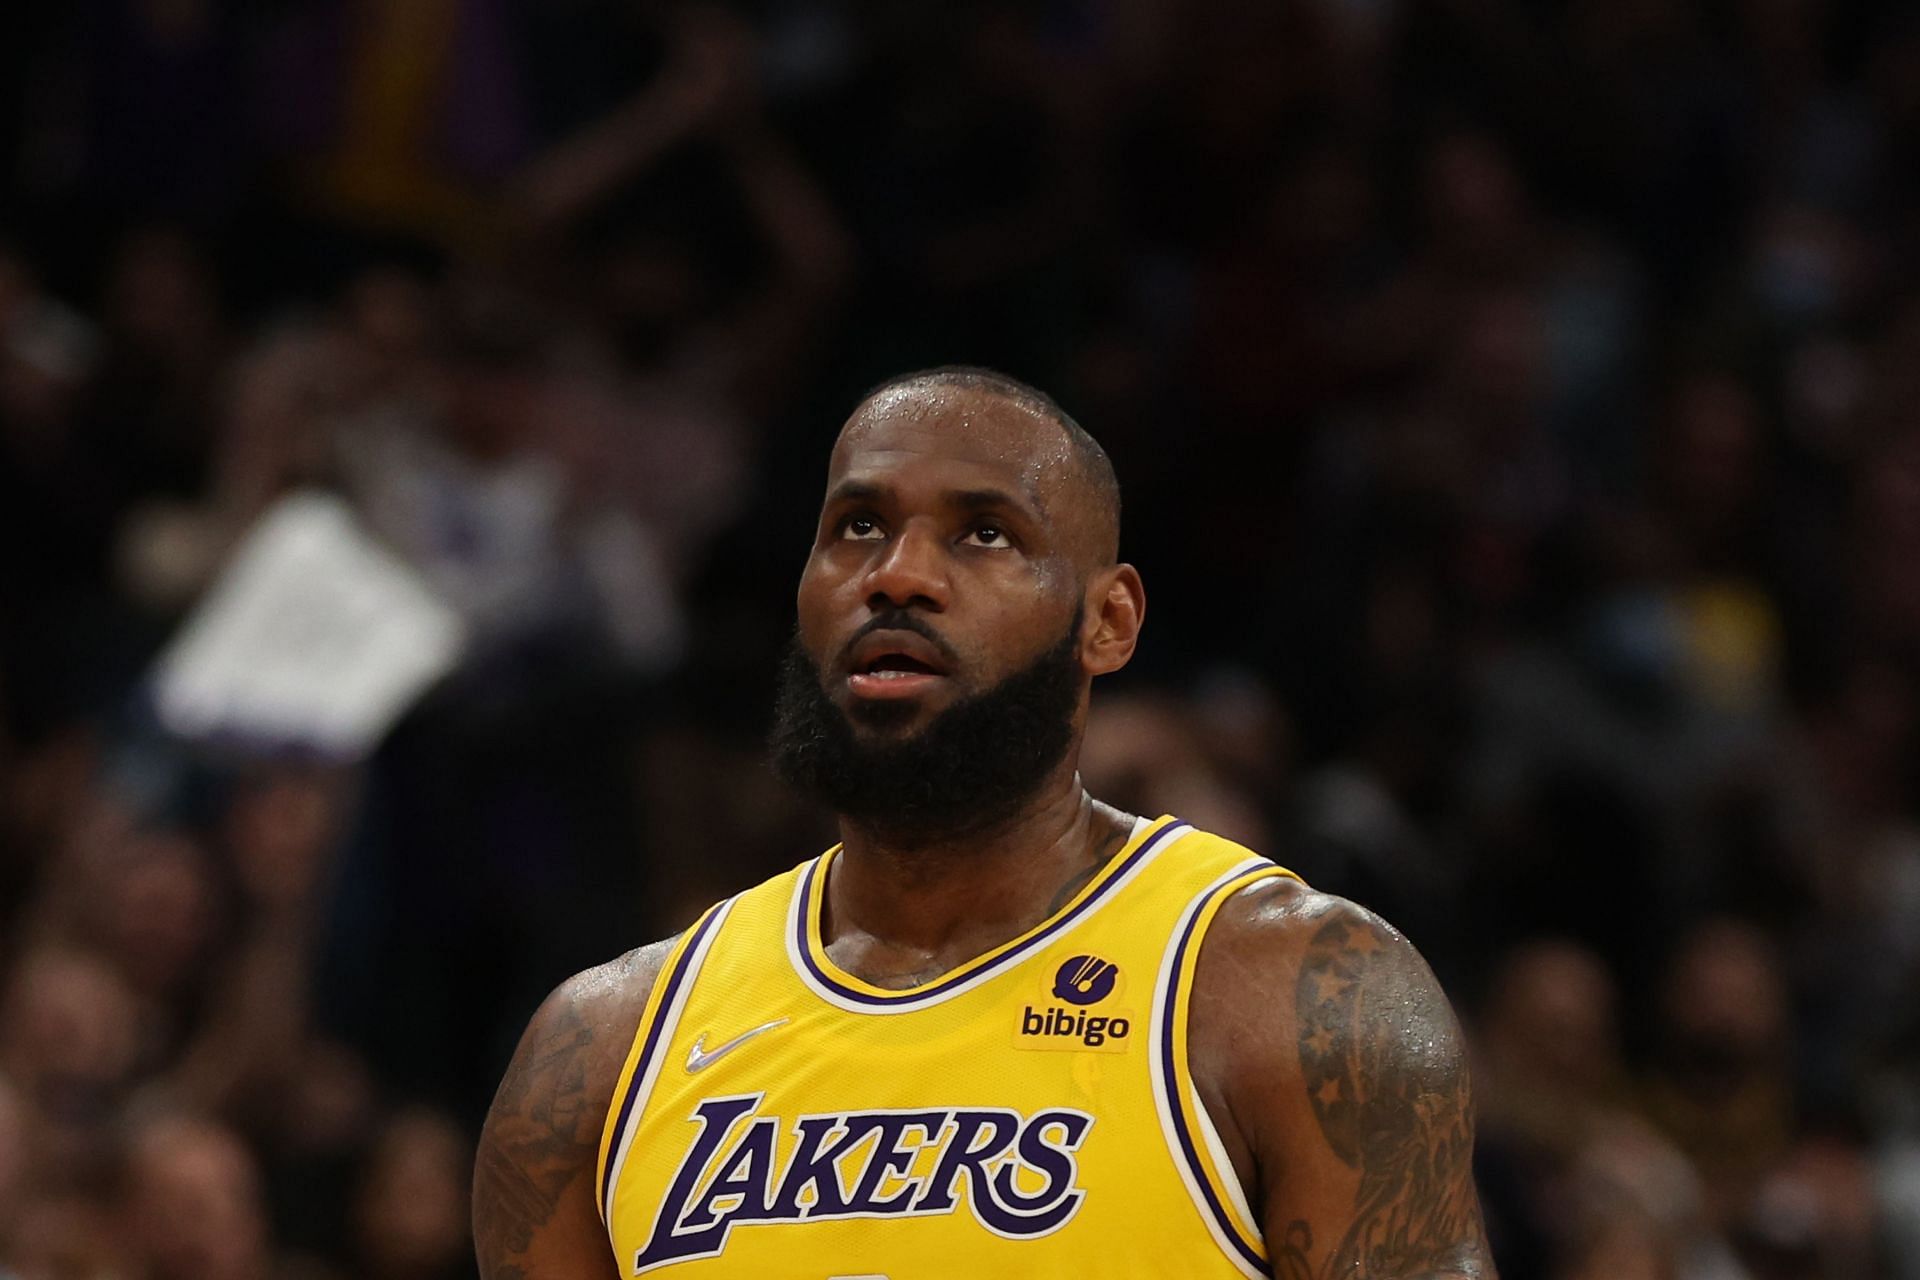 LeBron James will reportedly decline any LA Lakers contract extension offer to keep his options flexible.